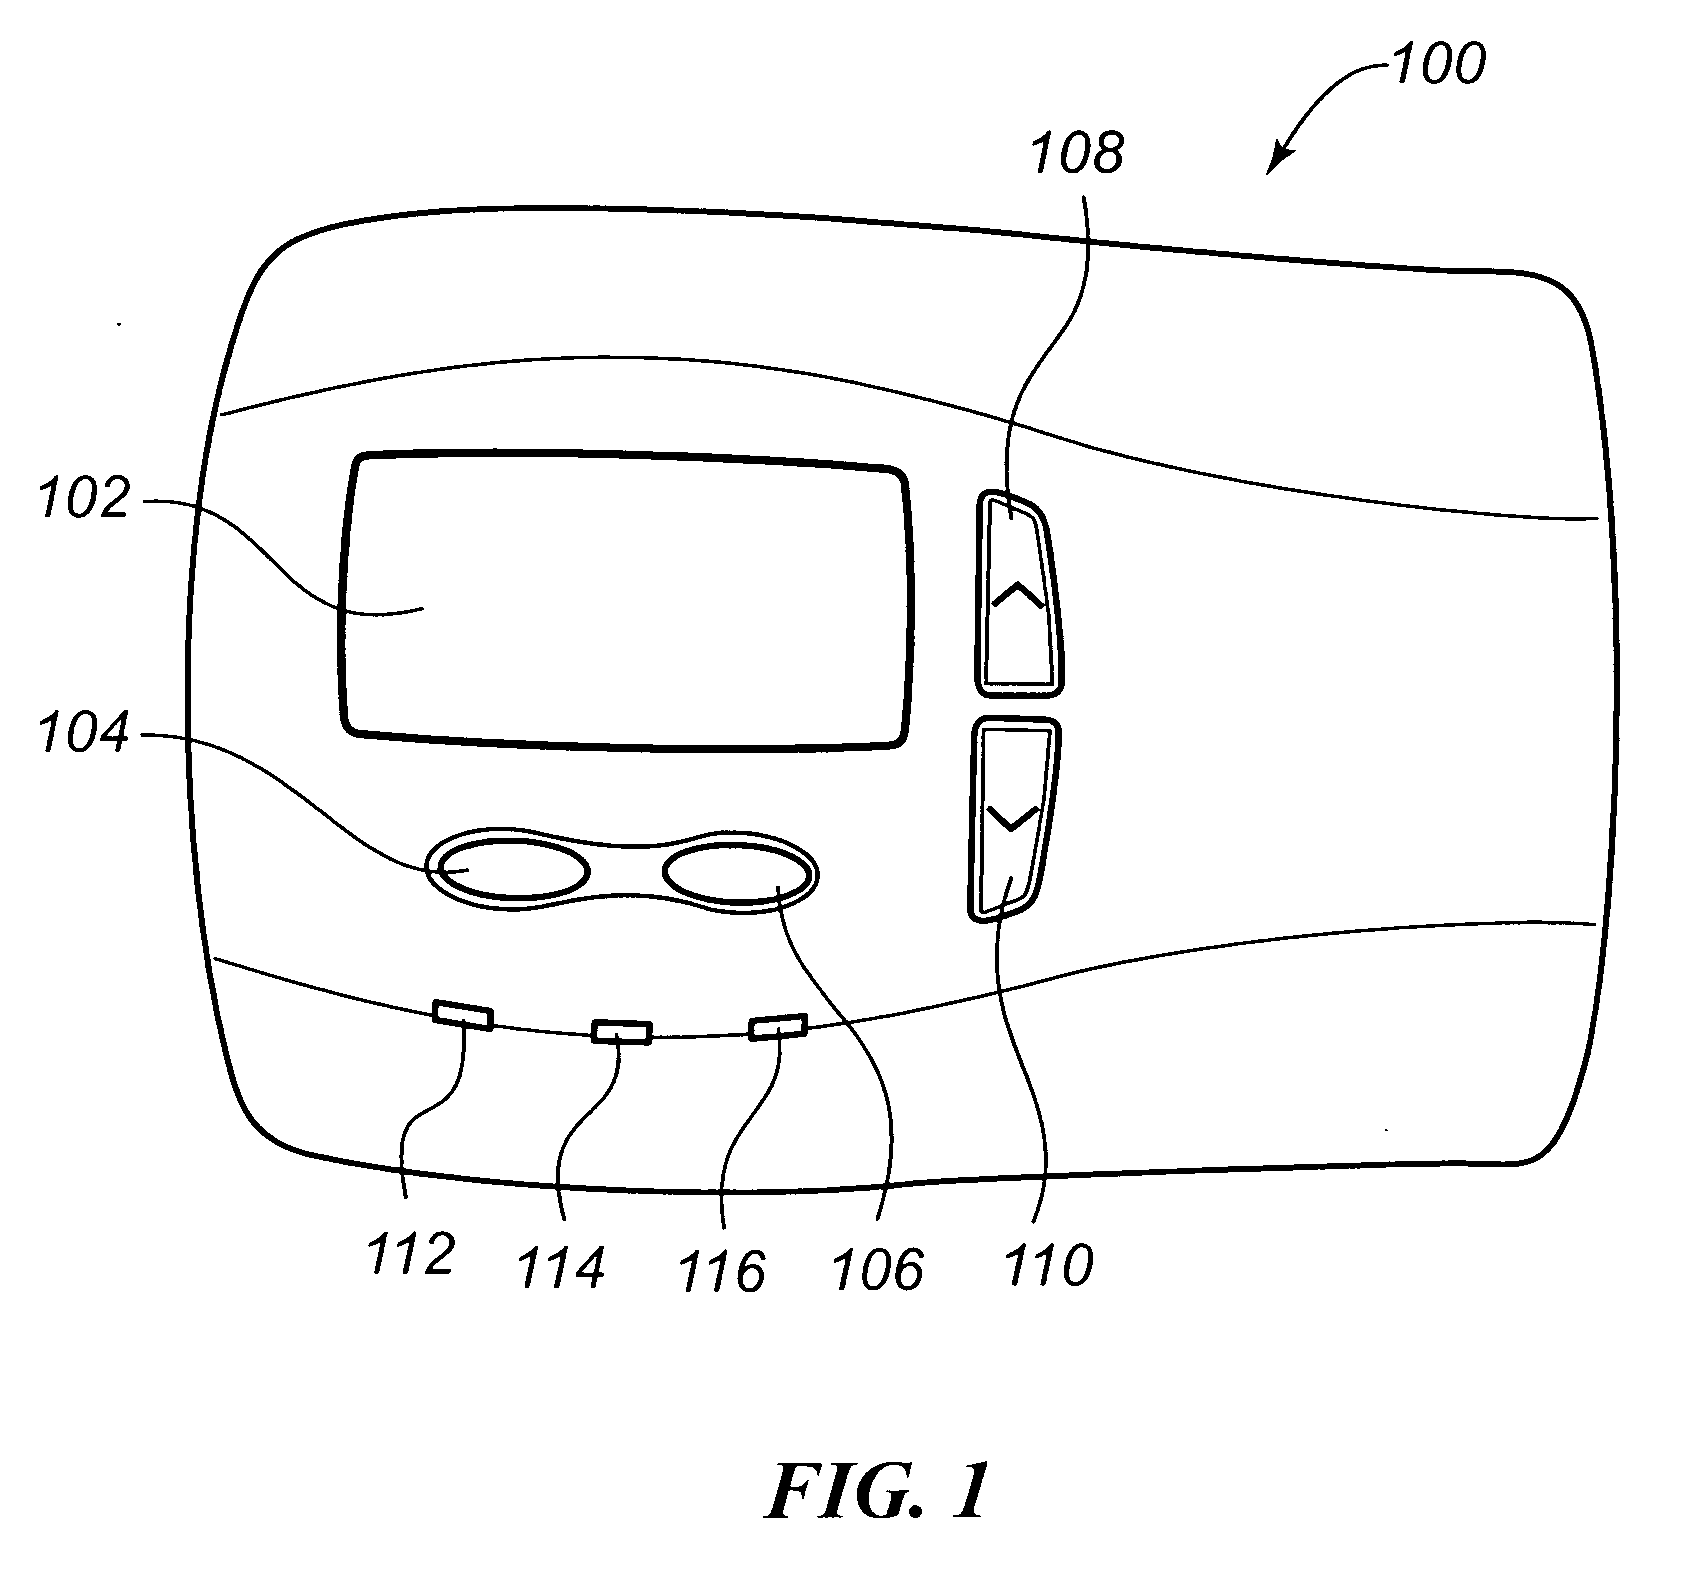 Thermostat display system providing adjustable backlight and indicators